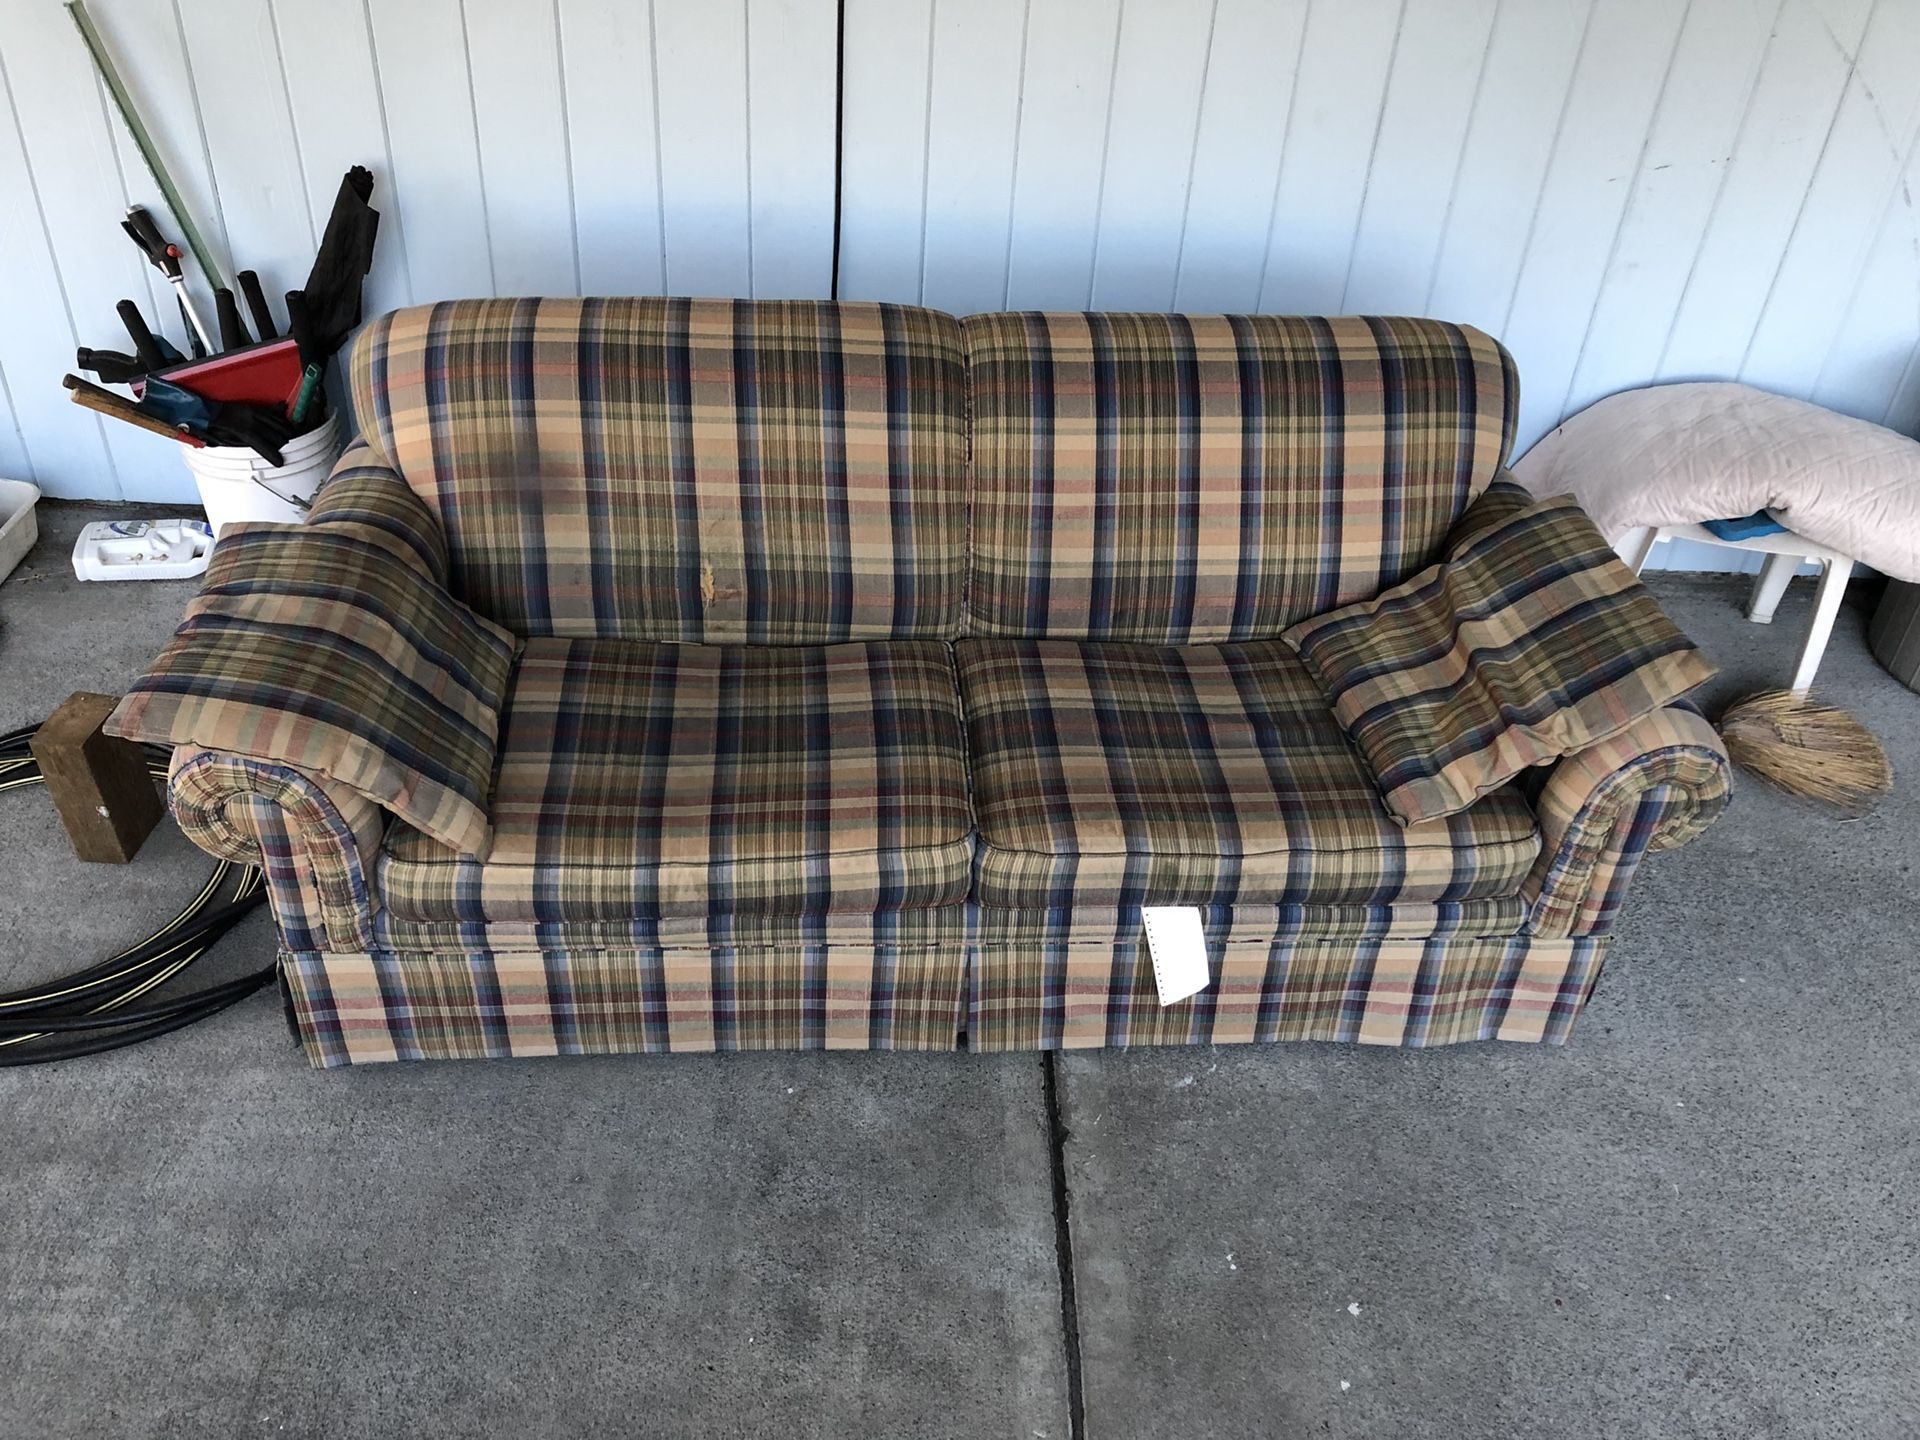 Free Couch and it’s in pretty good shape